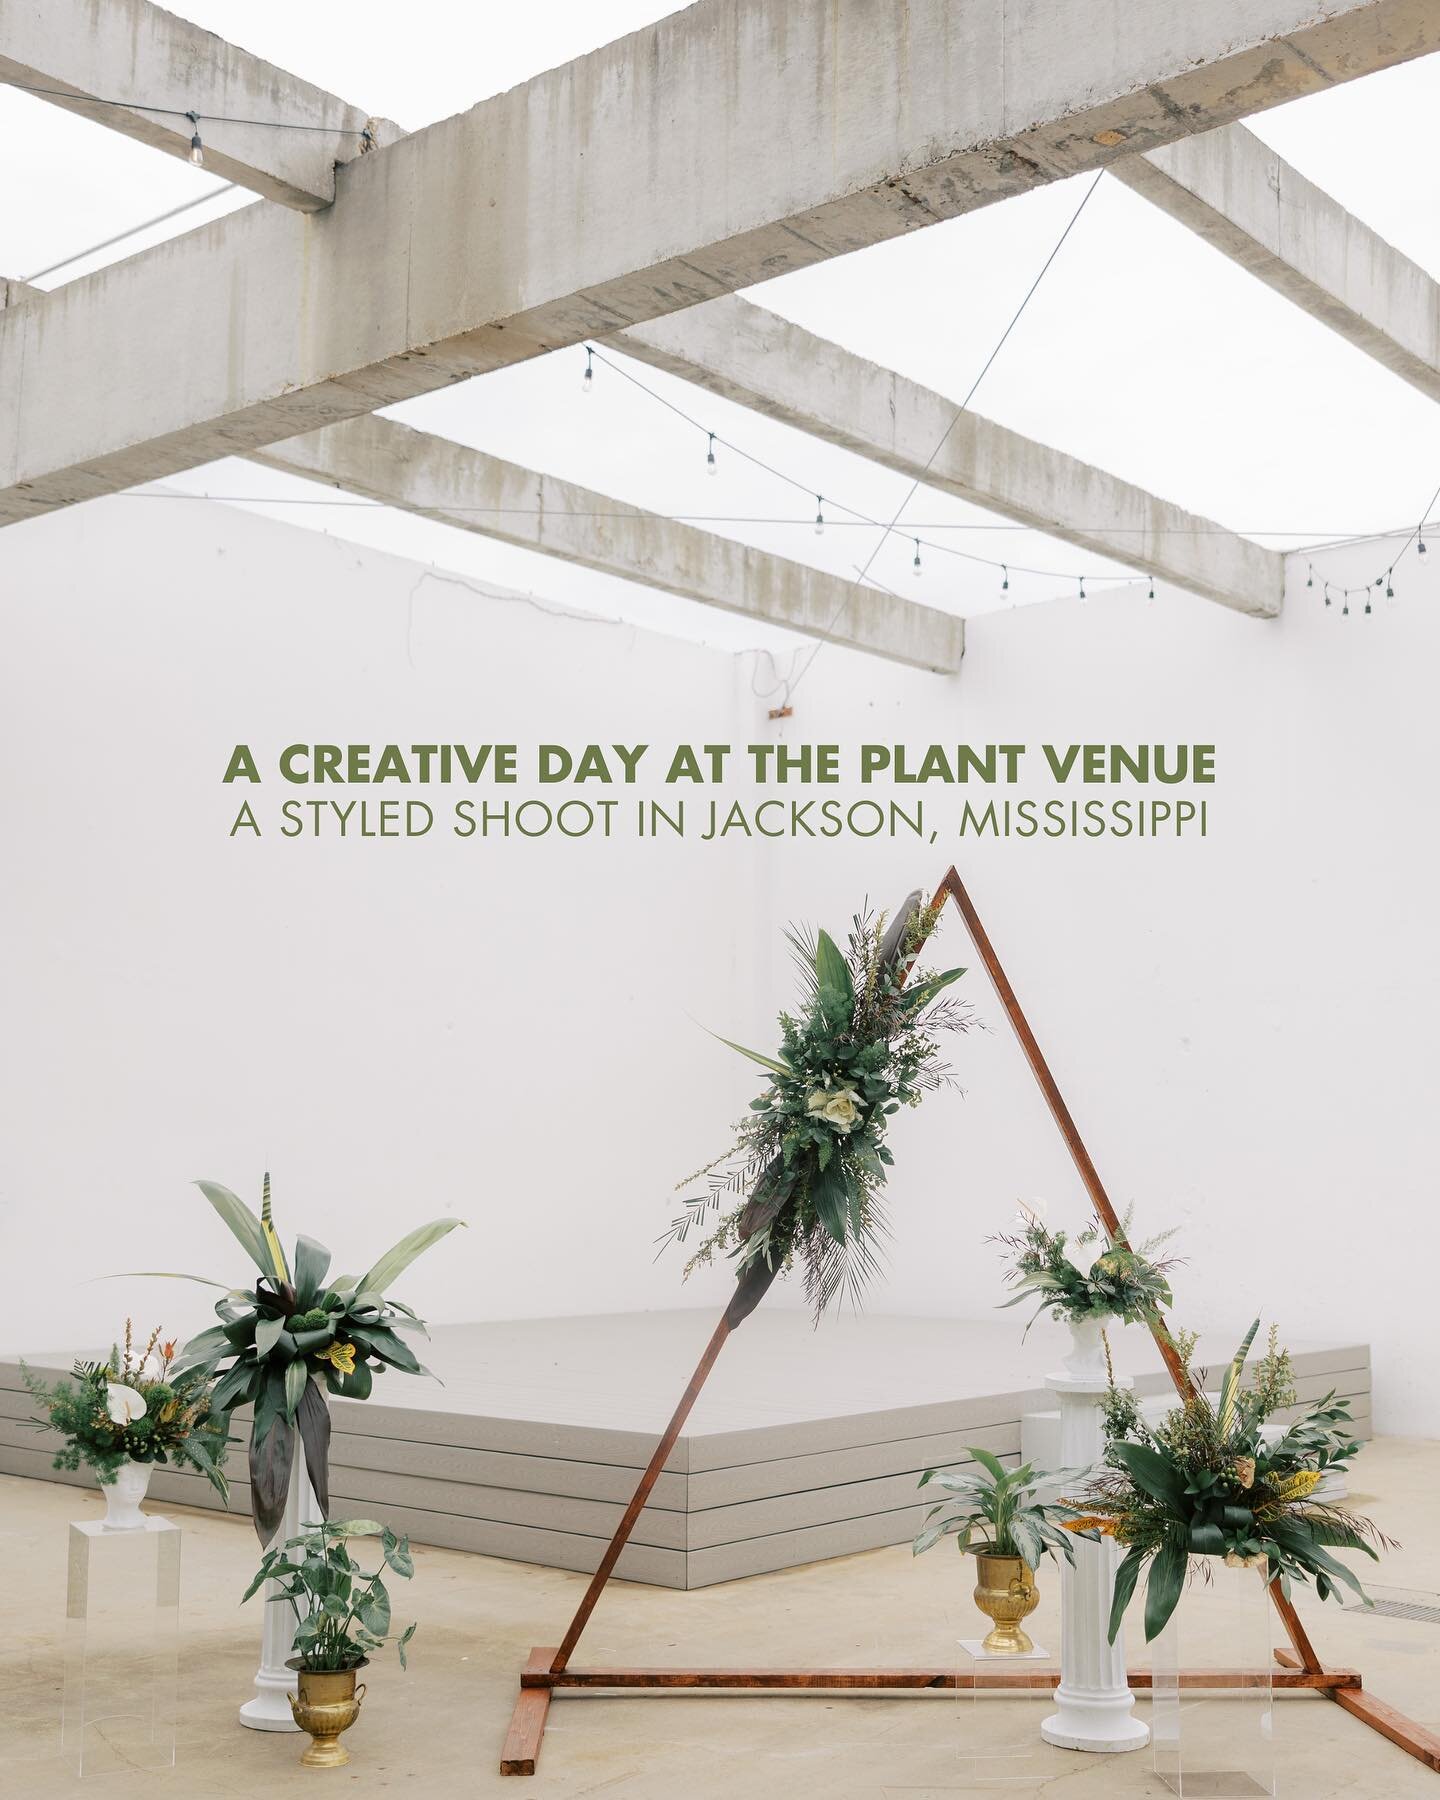 A lovely Monday afternoon read by @shelbymullinsphotography 💬

Follow the link in our bio to read A Creative Day at The Plant Venue: A Styled Photoshoot in Jackson, Mississippi &mdash;&mdash; an extended review on the recent styled photoshoot experi